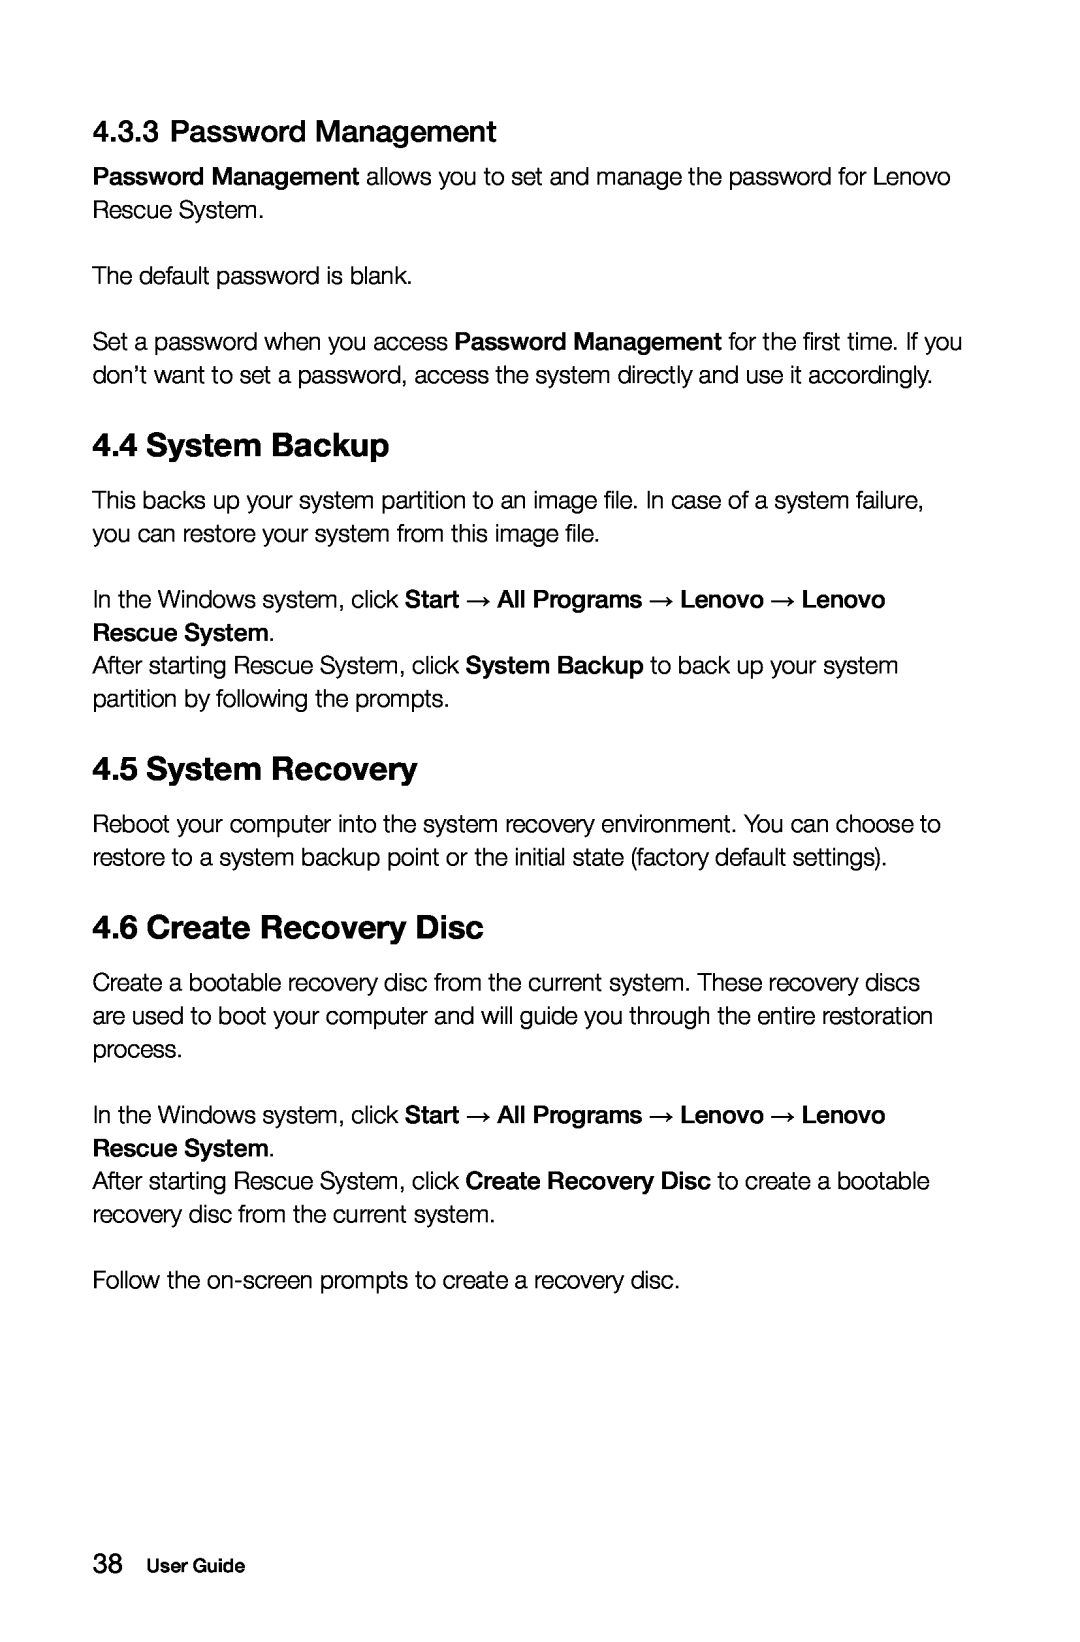 Lenovo 4749 [B545], 97, 3363 [B540p] 10098 manual System Backup, System Recovery, Create Recovery Disc, Password Management 